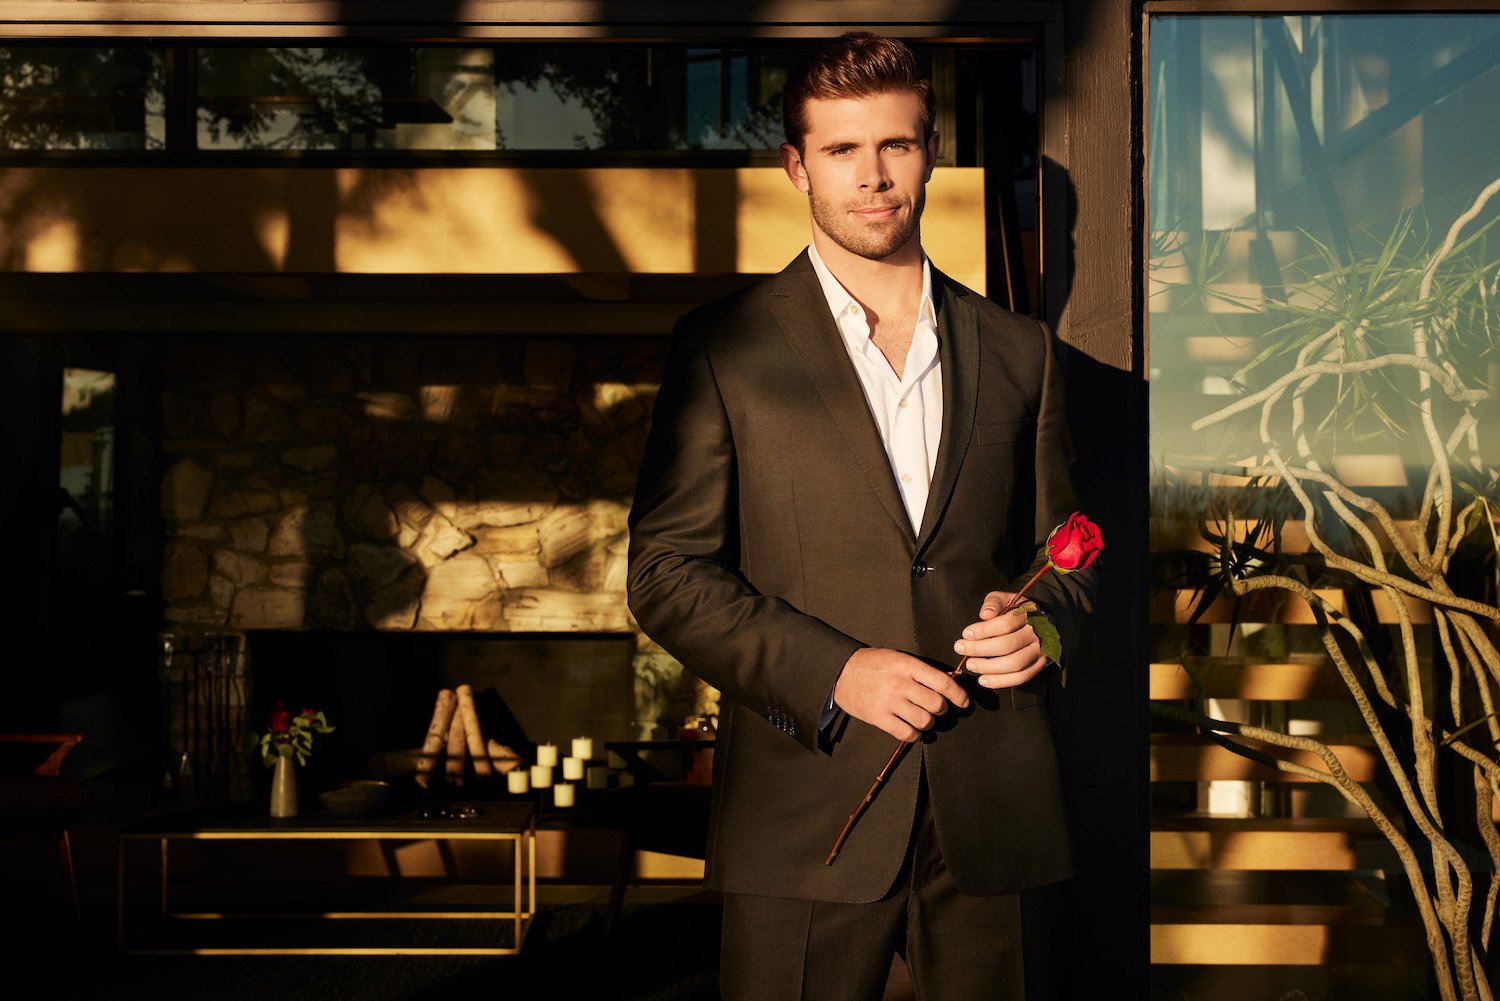 'The Bachelor' star Zach Shallcross stands in a suit, holding a rose. What was Zach Shallcross's job before he became a reality star?